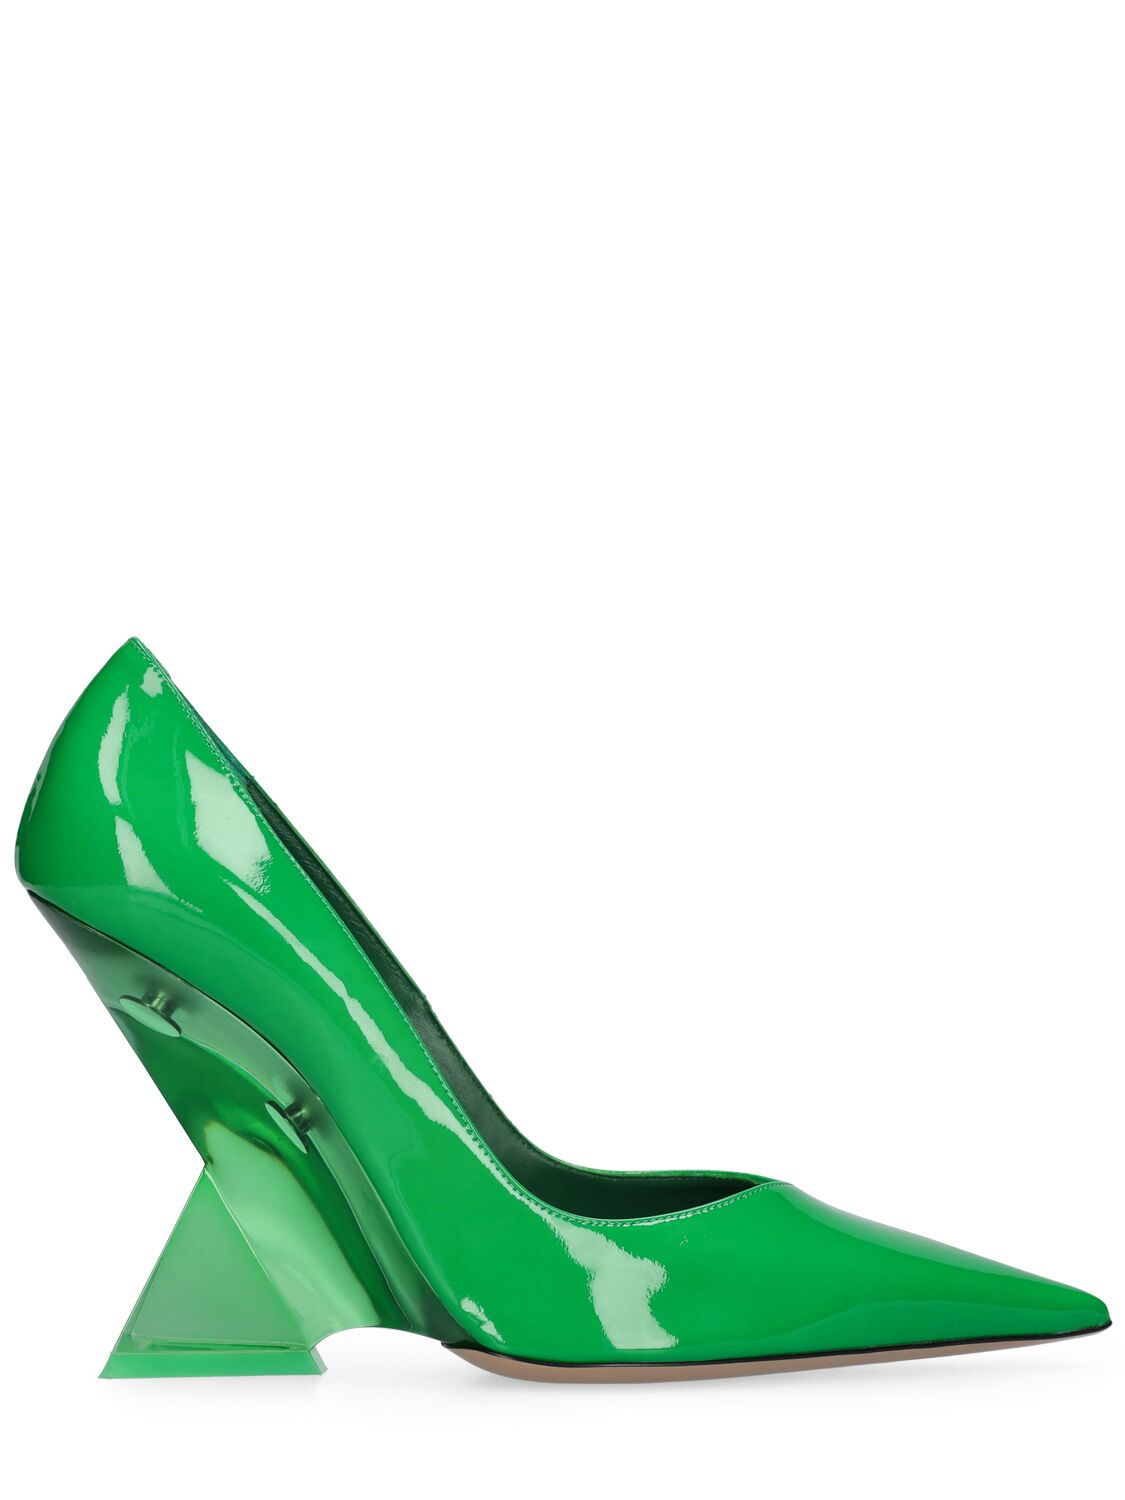 105mm Cheope Patent Leather Pumps